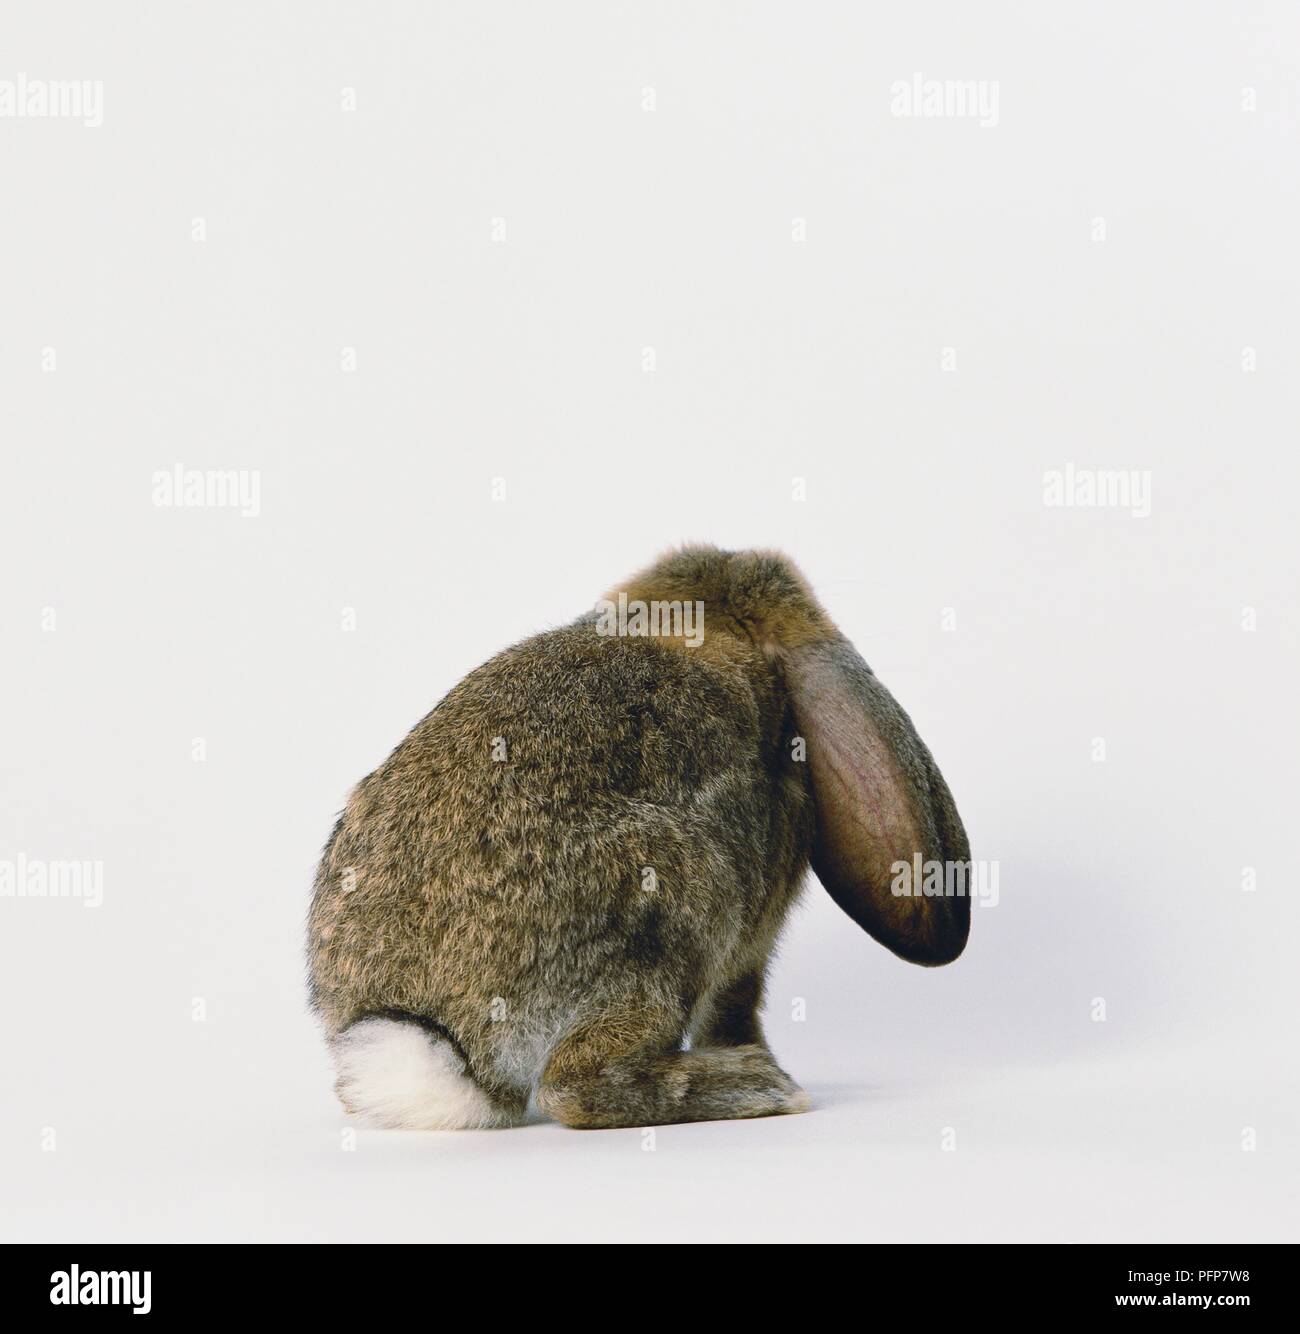 Rabbit showing large ear and white tail, rear view Stock Photo